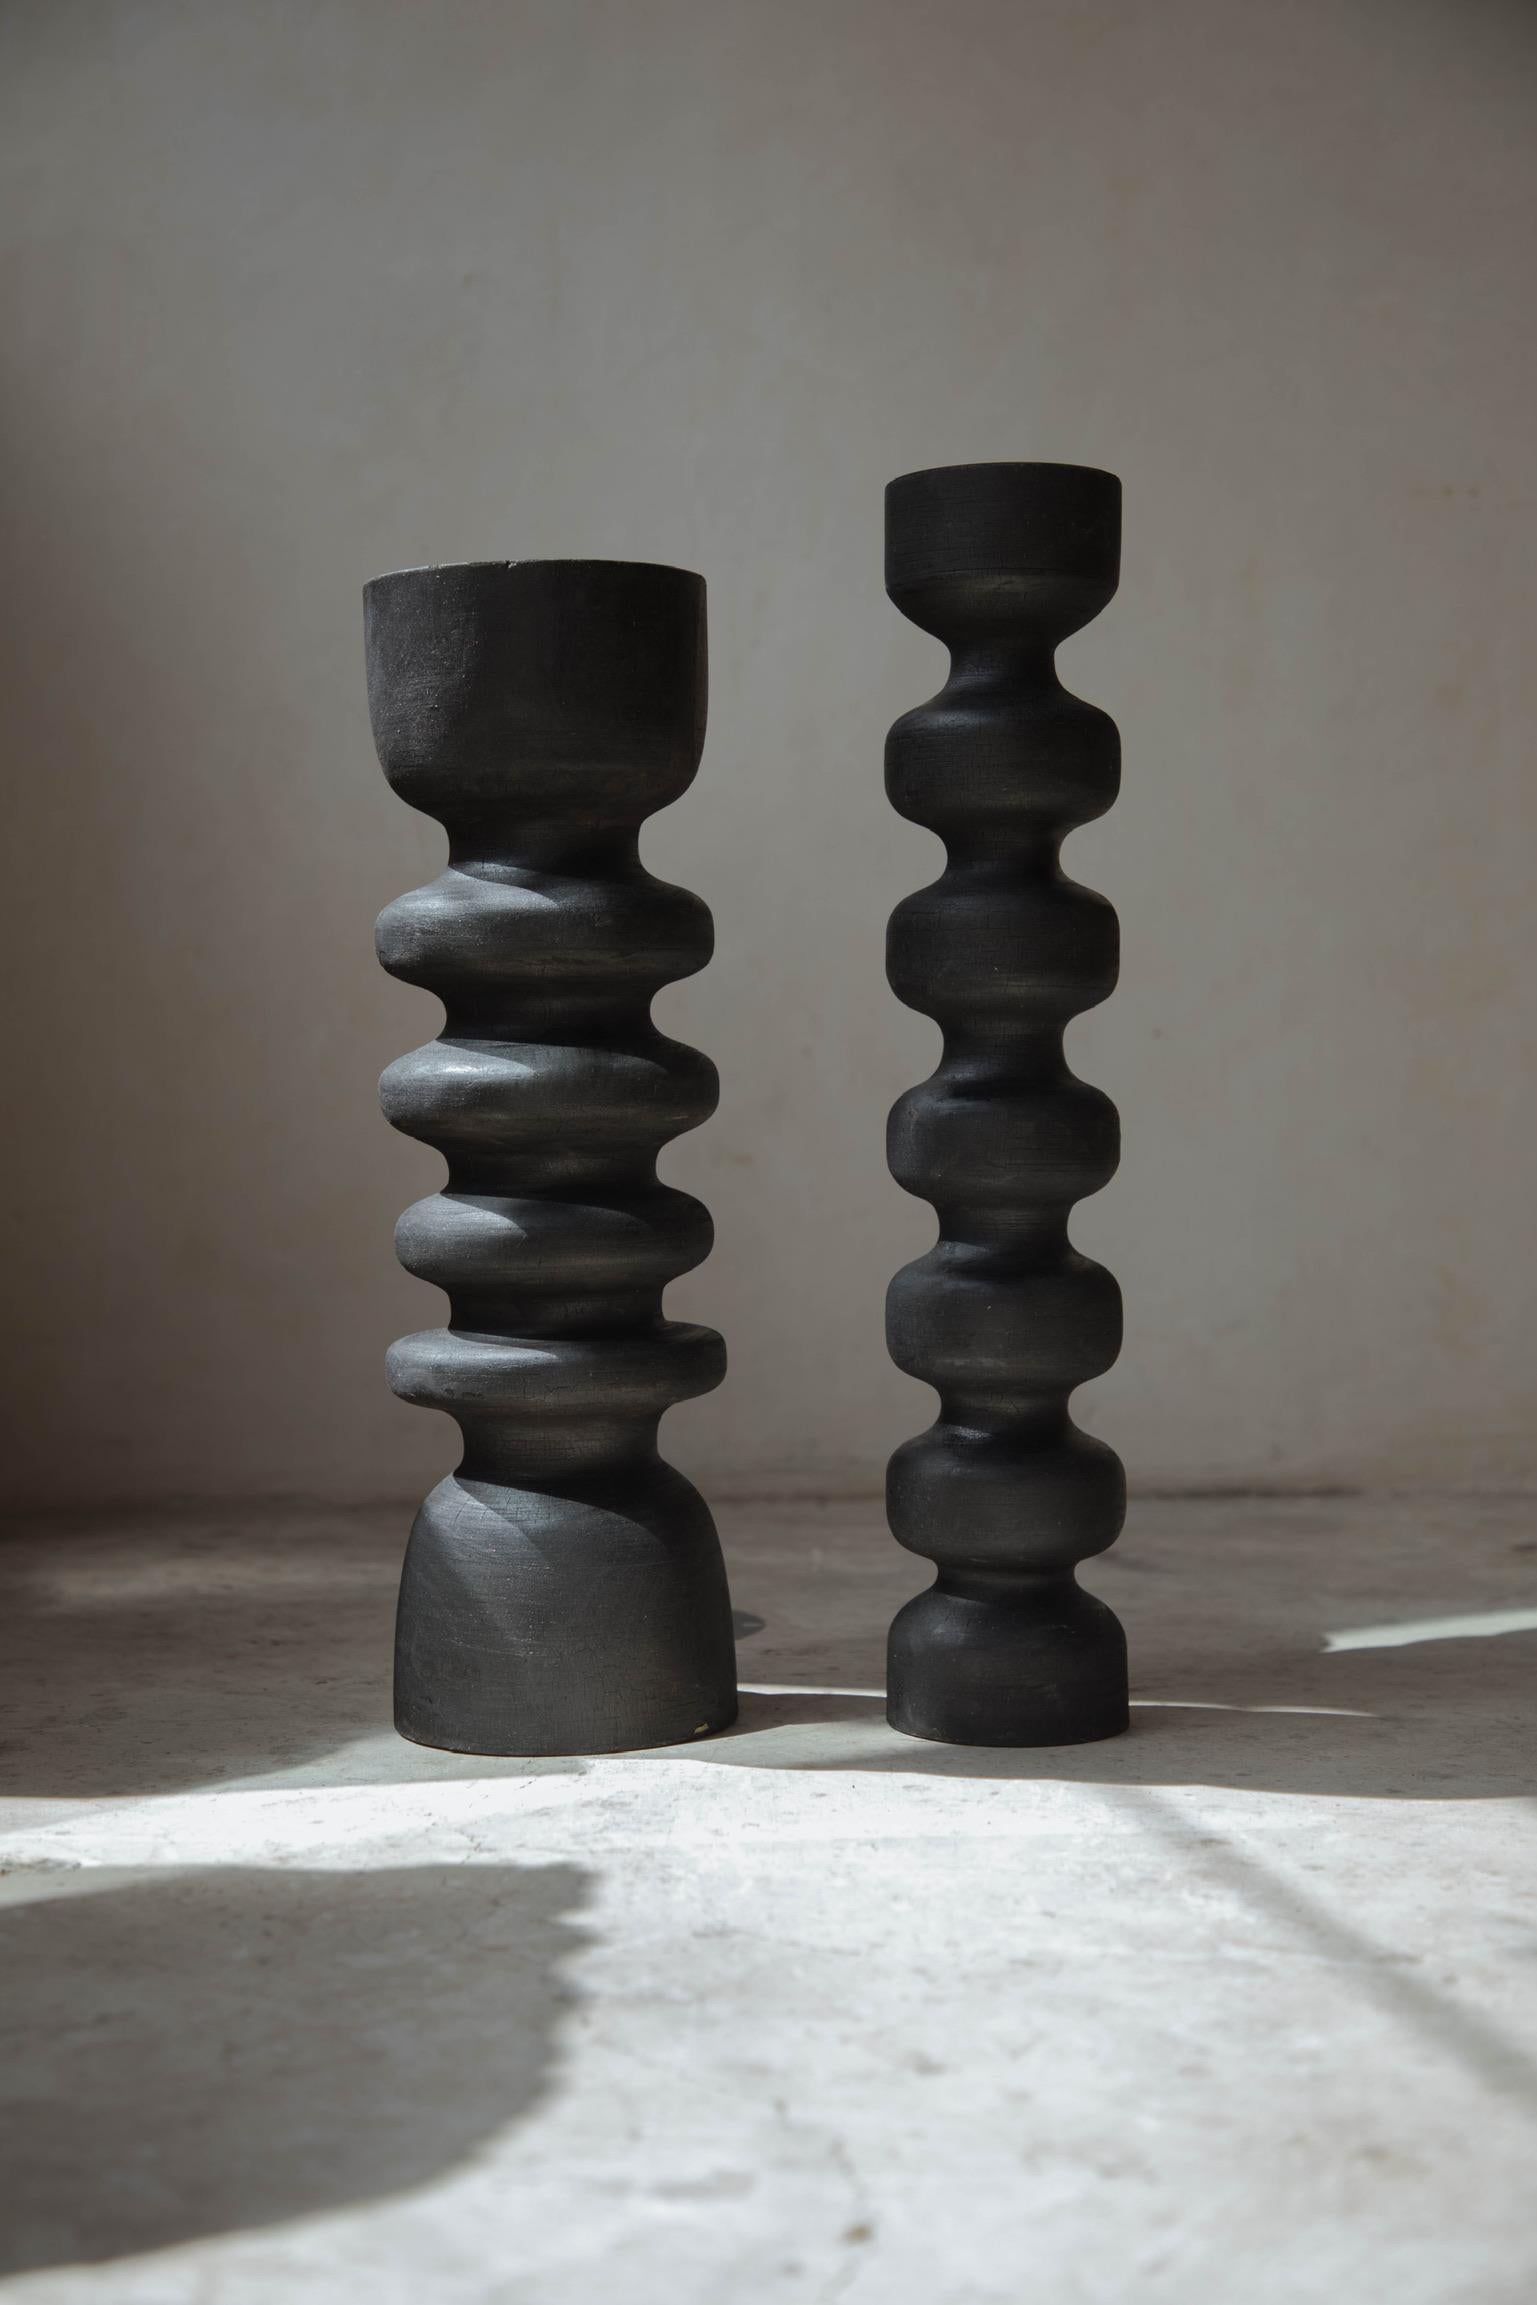 Set of 2 Black Burned Totem candleholders by Daniel Orozco
Material: Black burned solid wood.
Dimensions: D 14 x H 50.8 cm , D 12.7 x H 48.3 cm.

2 black burned wood candle holders. Handmade by Mexican Artisans.

Daniel Orozco Estudio
We are an